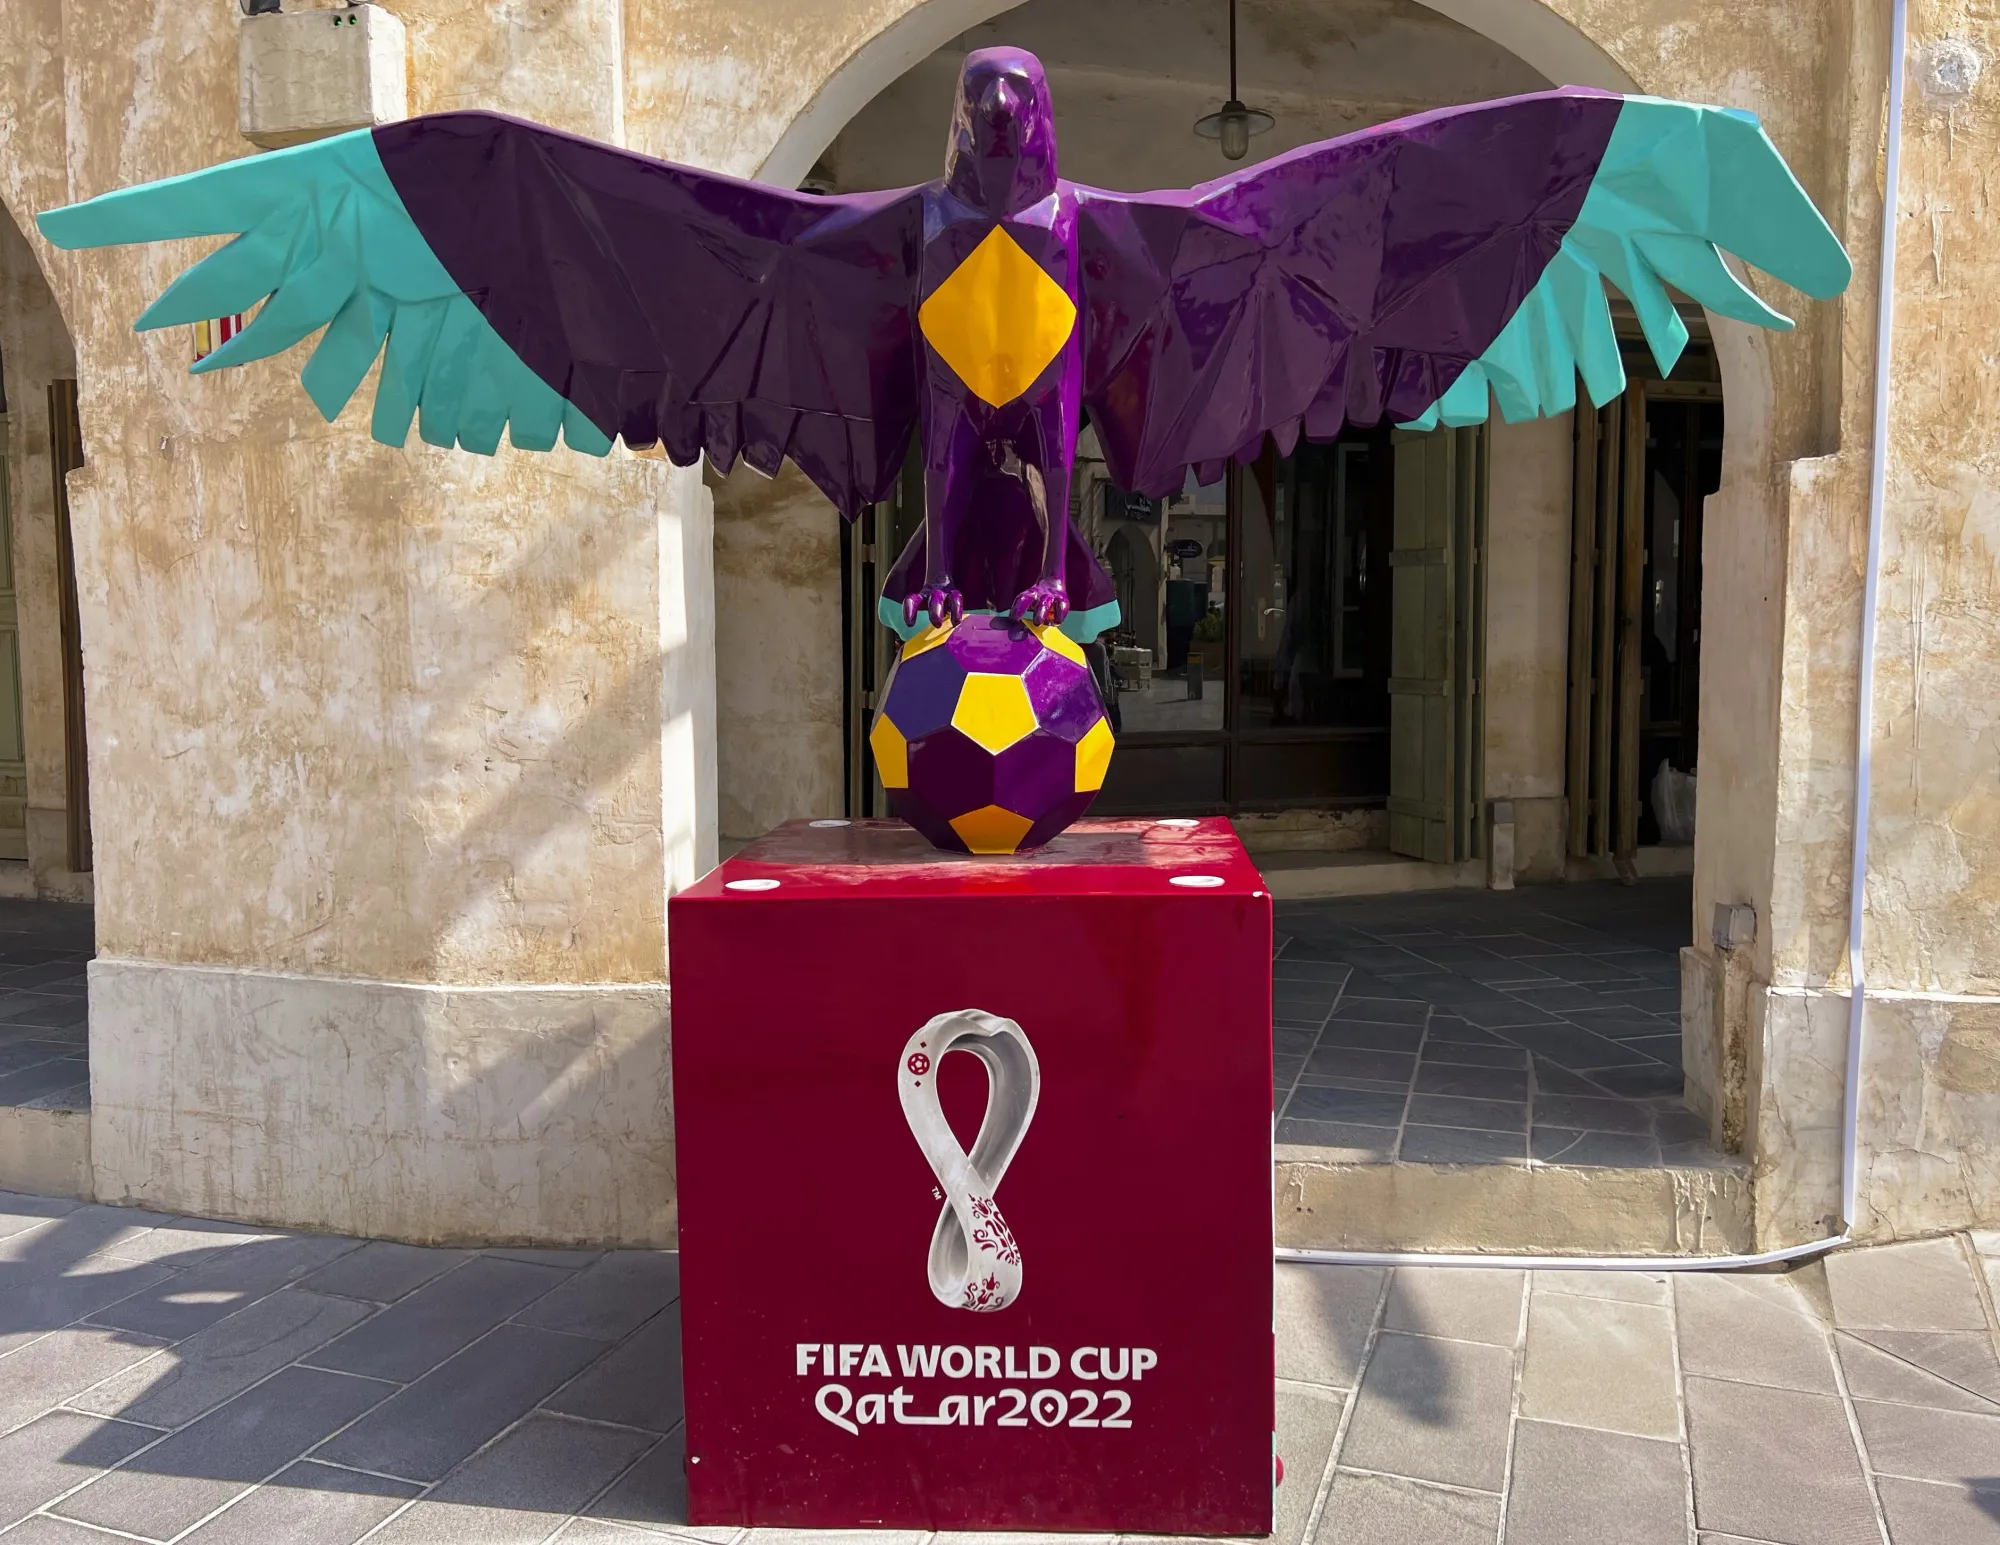 A purple statue of a falcon perched on a soccer ball above a box for the 2022 FIFA World Cup